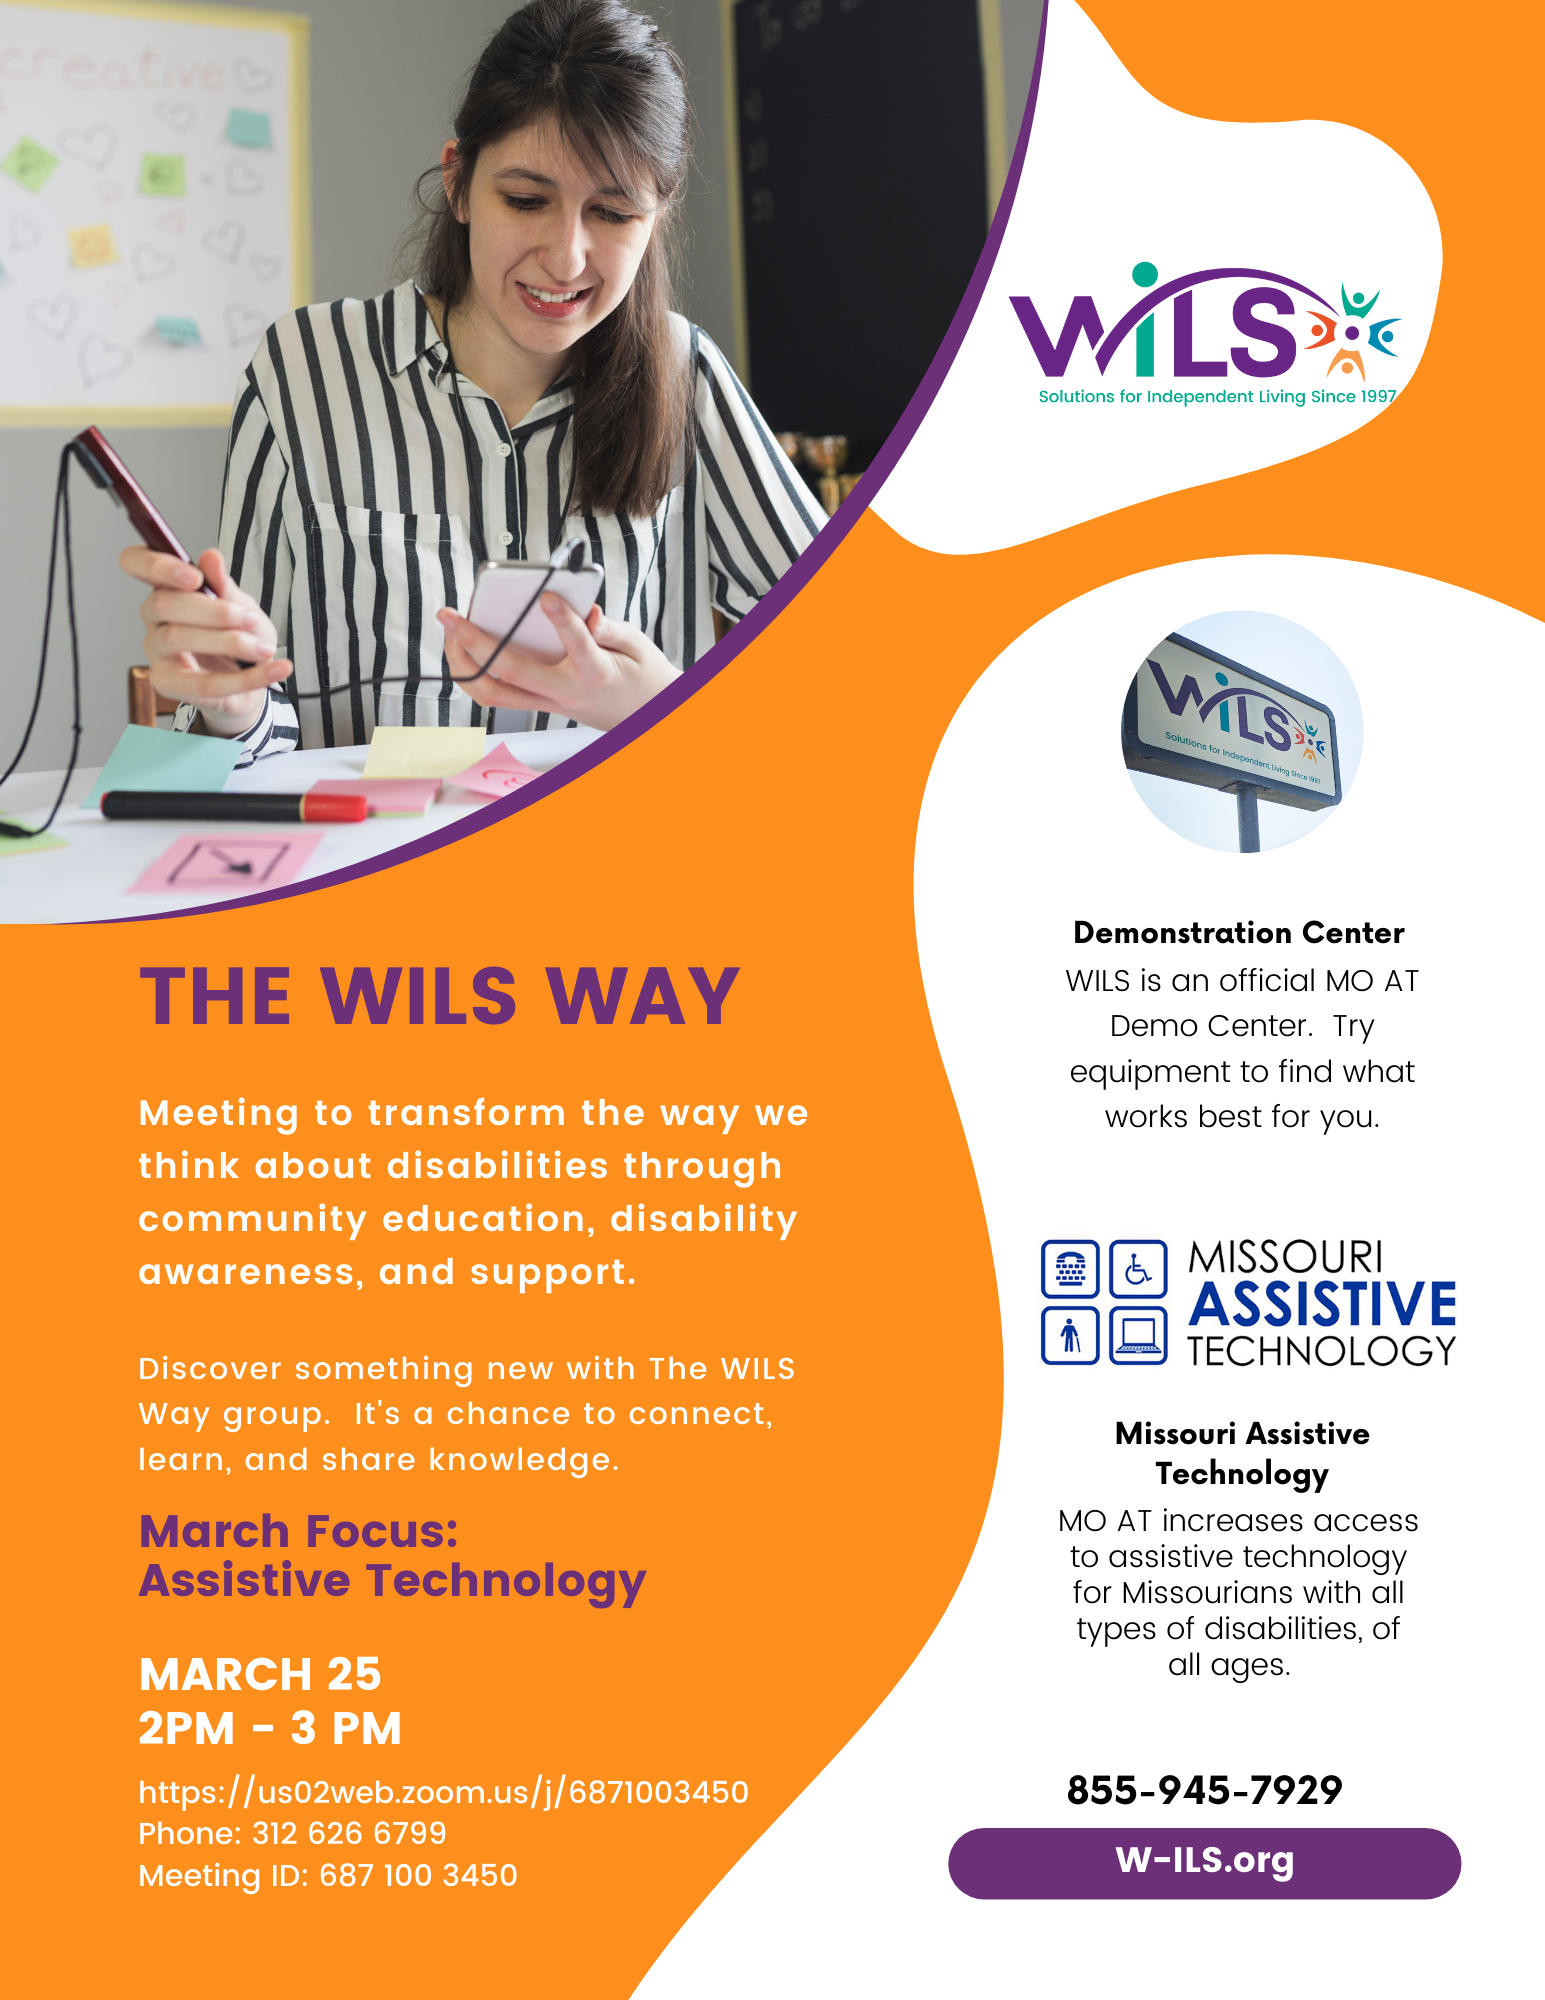 The WILS Way: Meeting to transform the way we think about disabilities through community education, disability awareness, and support.    Discover something new with The WILS Way group.  It's a chance to connect, learn, and share knowledge.  March Focus: Assistive Technology. https://us02web.zoom.us/j/6871003450 Phone: 312 626 6799 Meeting ID: 687 100 3450